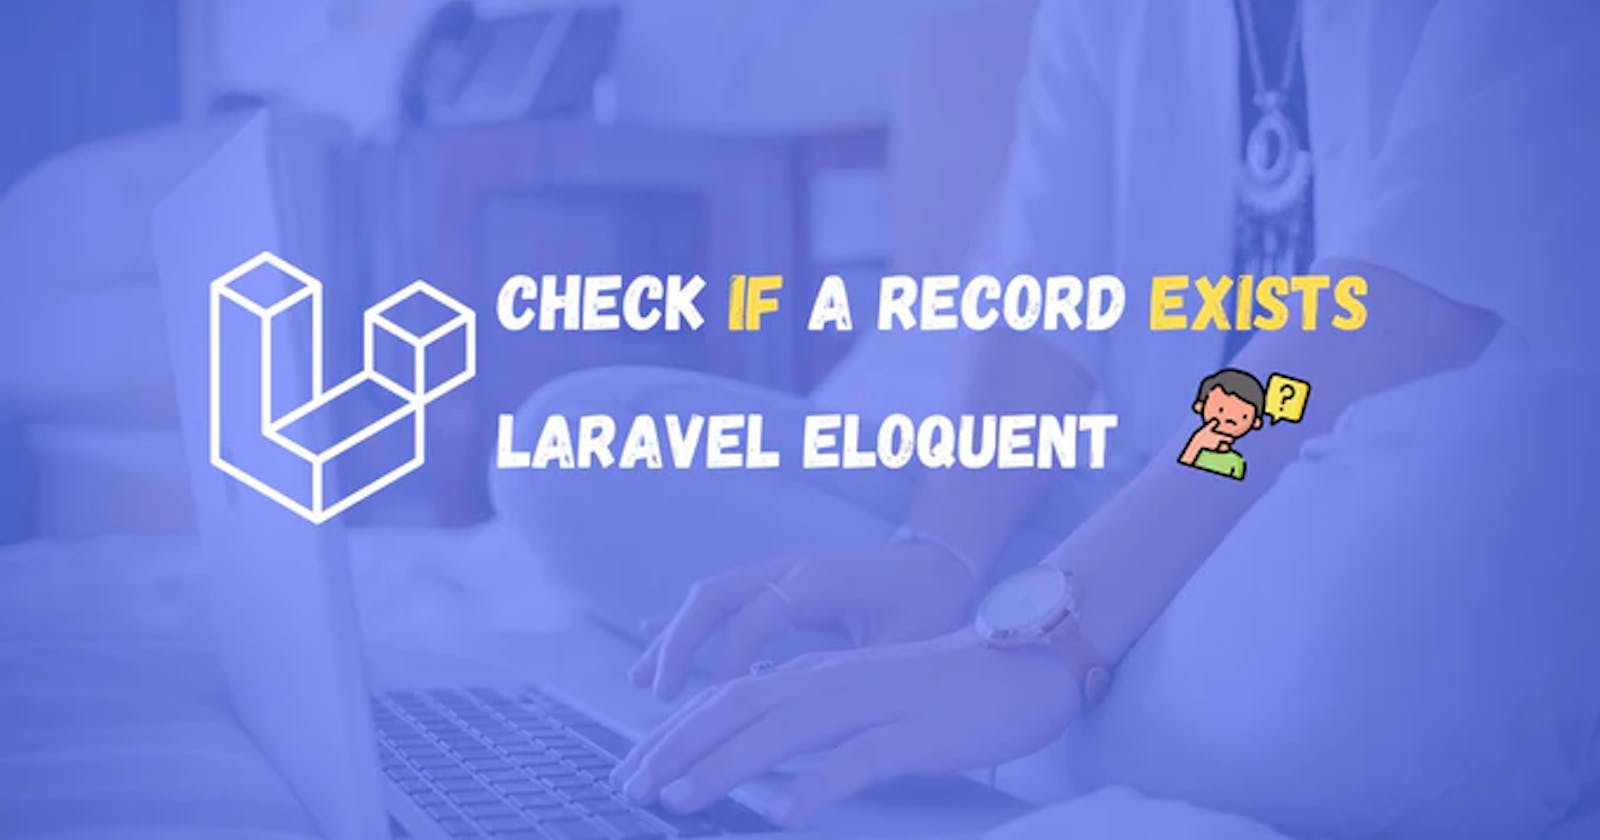 How to check if a record exists with Laravel Eloquent?